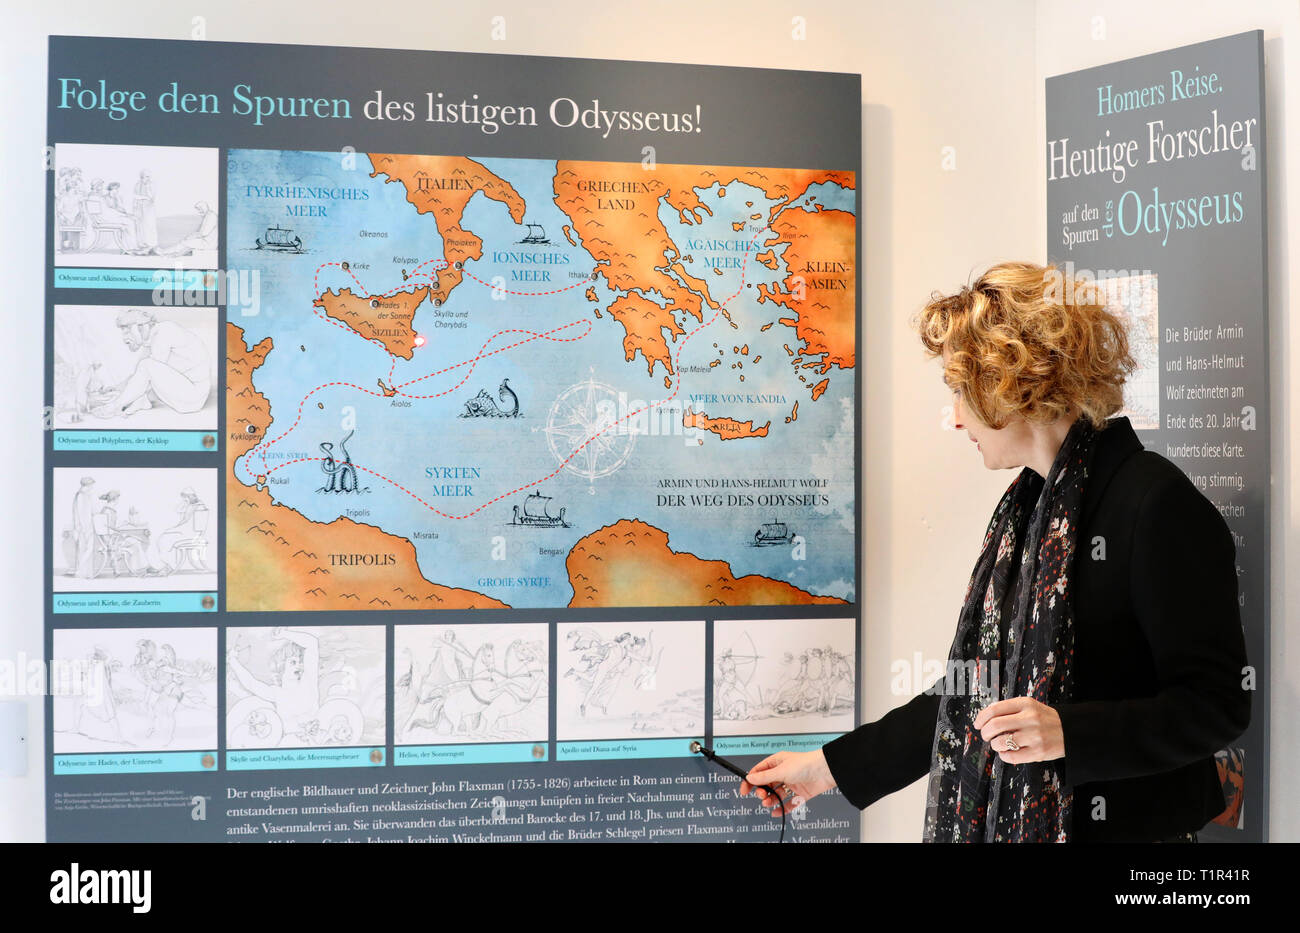 25 March 2019, Mecklenburg-Western Pomerania, Penzlin: In the exhibition 'Johann Heinrich Voß. A Greek from Mecklenburg' in the future Literaturhaus shows Andrea Rudolph, director, a map of the Mediterranean region where the individual legends of Odysseus played. The rebuilt and extended town school, in which Johann Heinrich Voss (1751-1826) learned from 1759-1766, is opened on 29.03.2019 as a literary house for the Homer translator. The most famous son of the city became known as a poet especially with translations of the 'Odyssey' and the 'Iliad', to which also the legend about the conquest Stock Photo